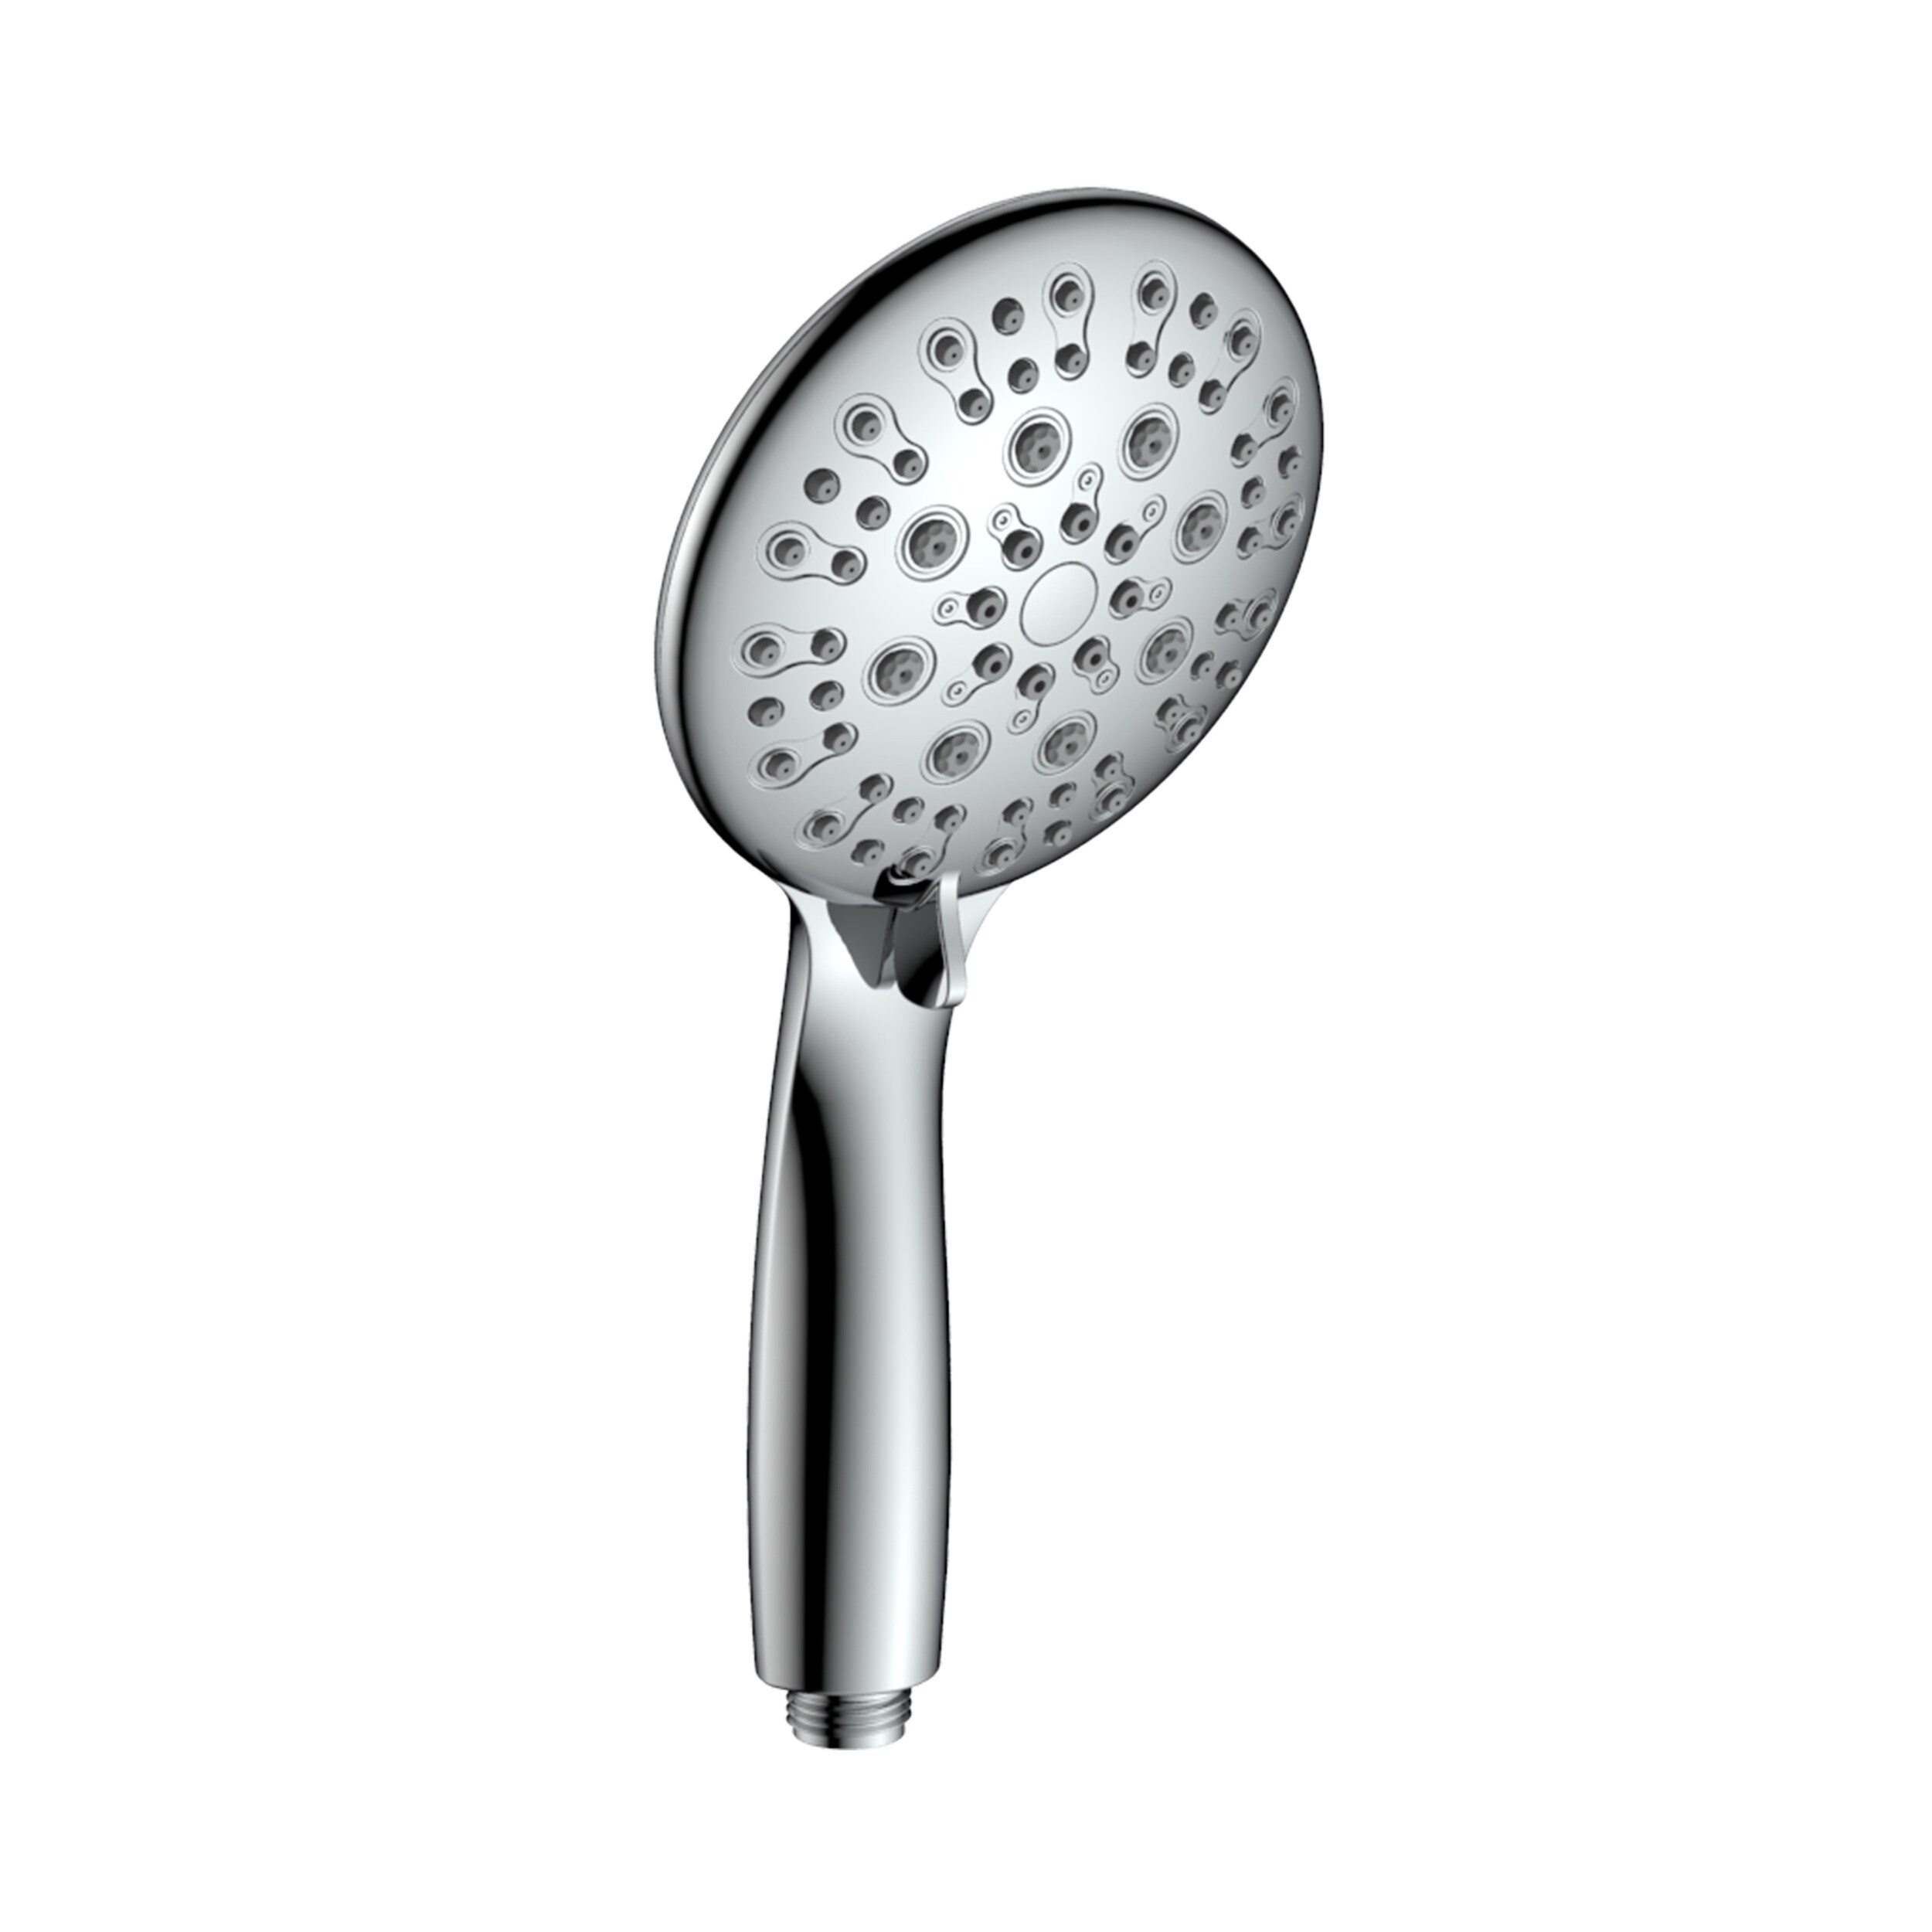 https://ak1.ostkcdn.com/images/products/is/images/direct/04ac056b7819fcc64331cfff53412bcee523be87/Multi-Function-Shower-Head---Shower-System-with-4%22-Rain-Showerhead-And-Storage-Hook%2C-Simple-Style%2C-Brushed-Nickel.jpg